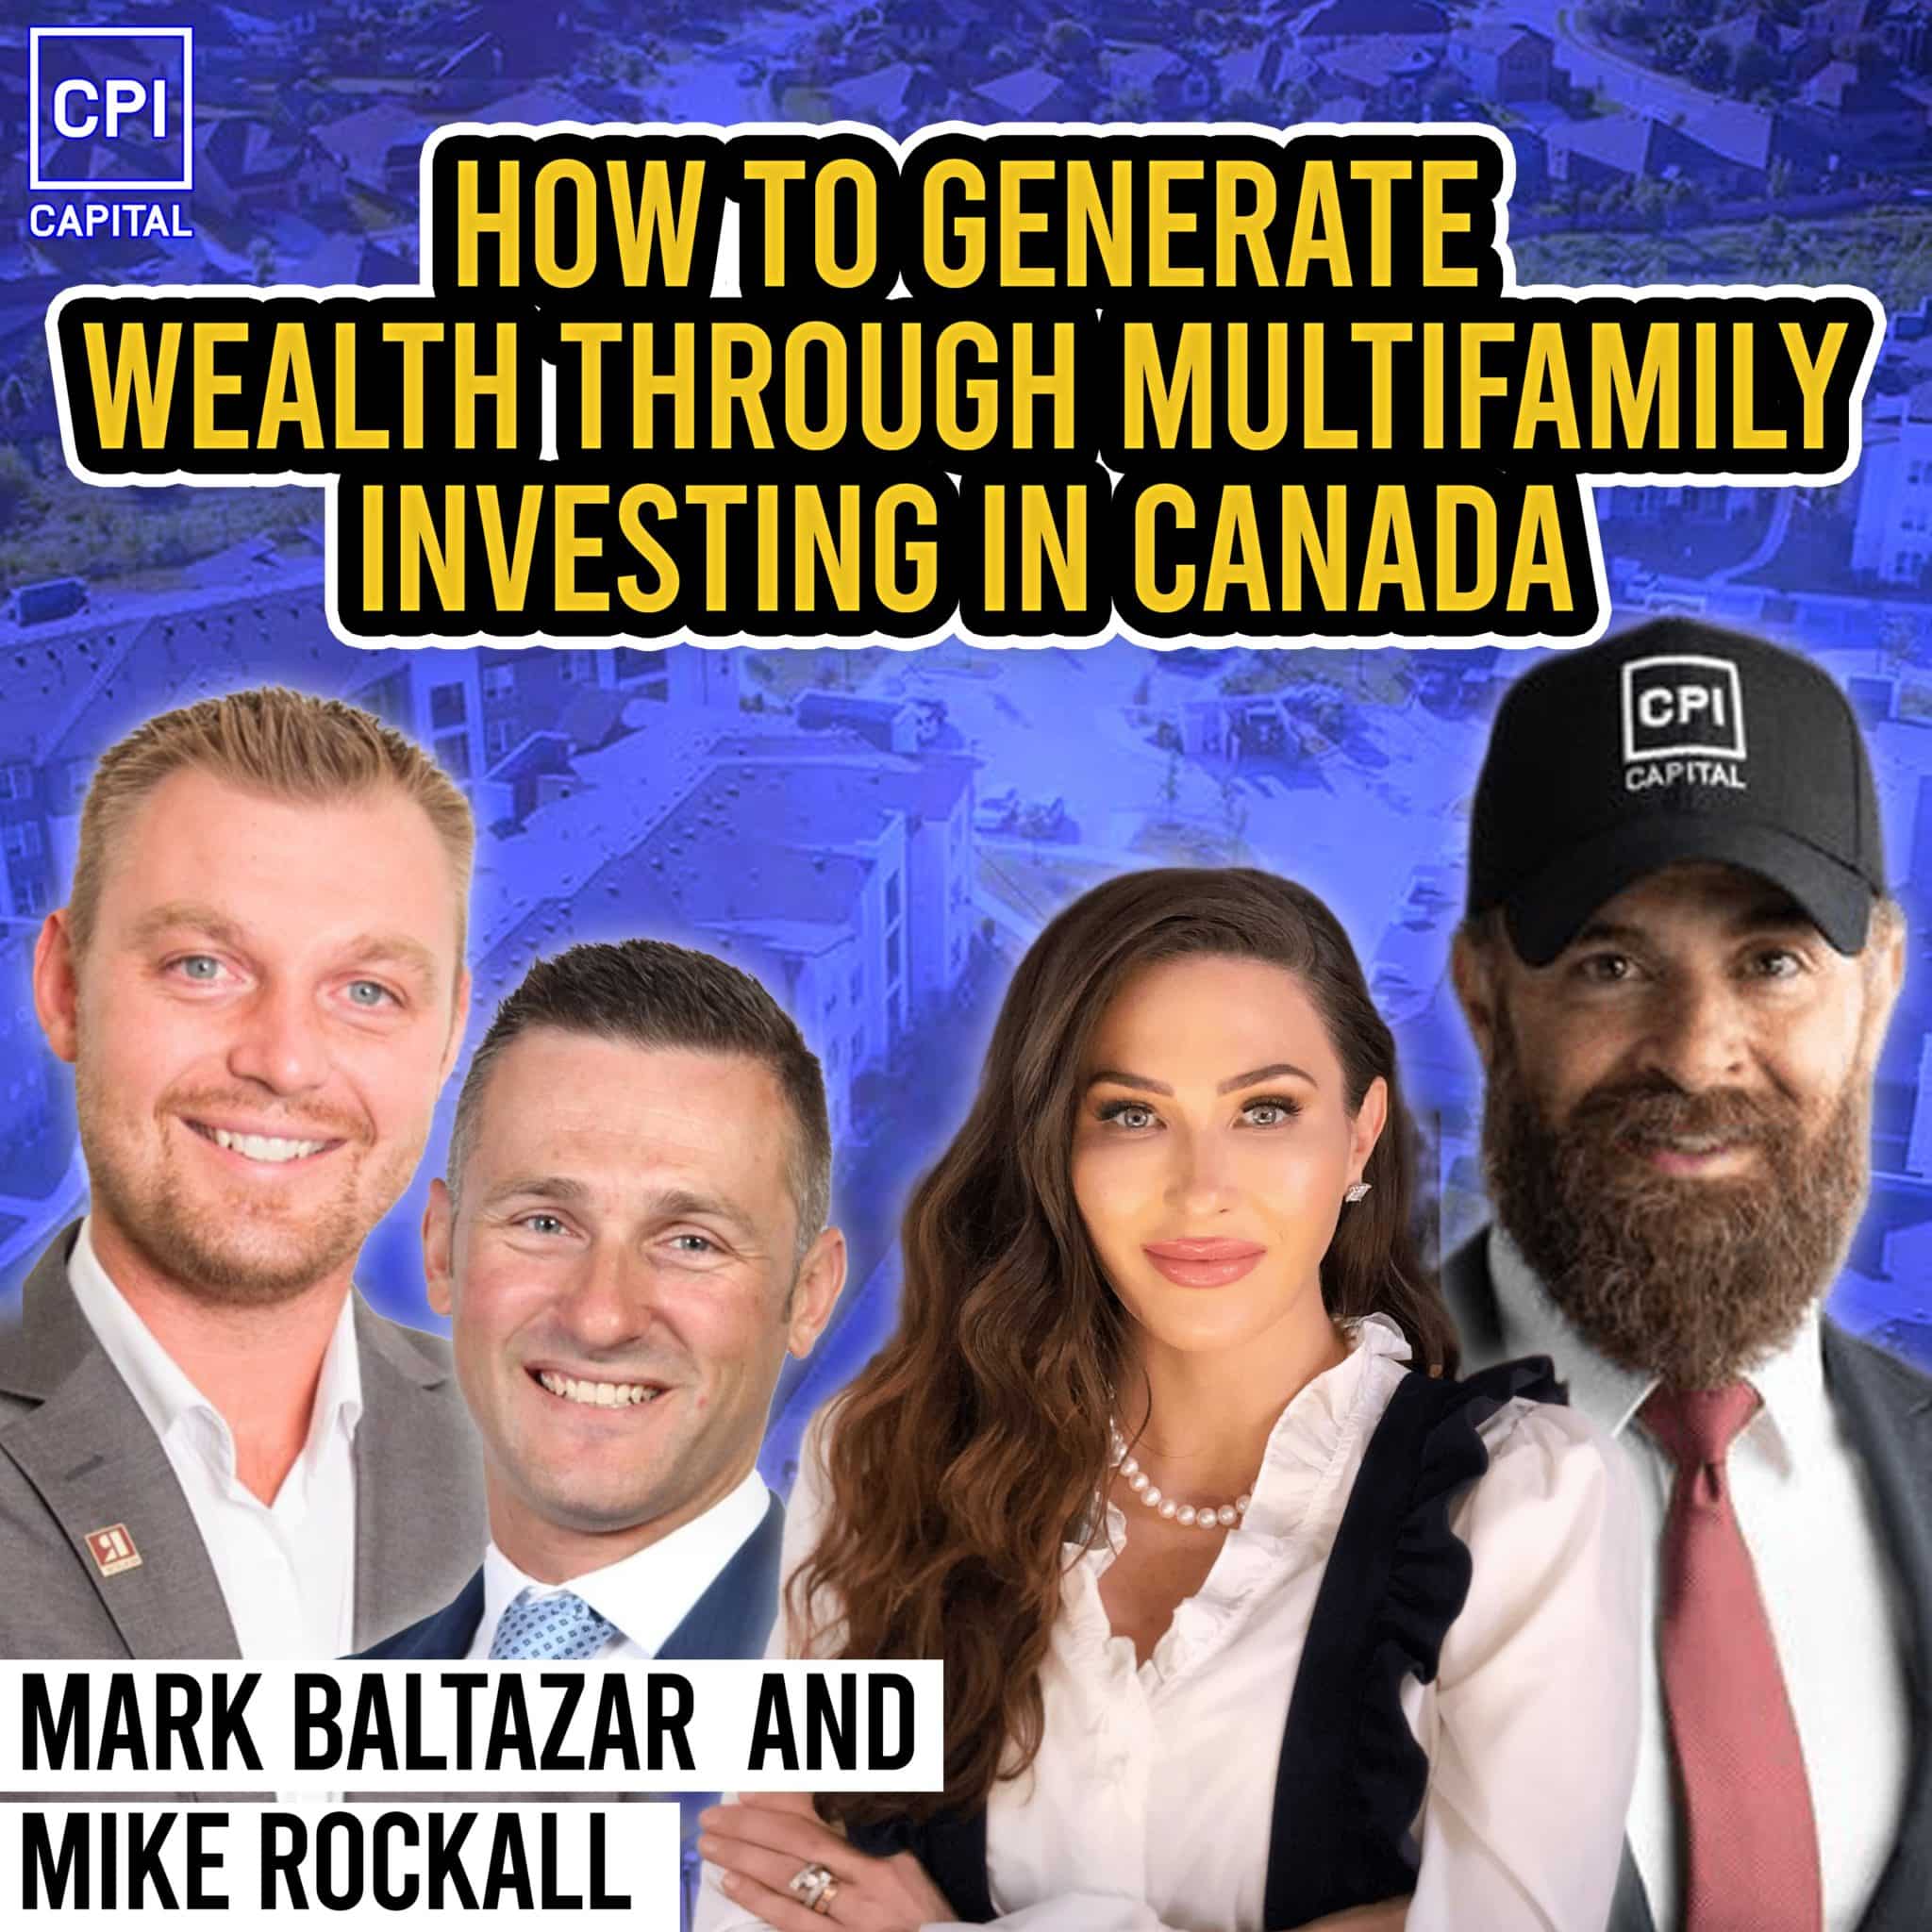 How To Generate Wealth Through Multifamily Investing In Canada – Mark Baltazar And Mike Rockall